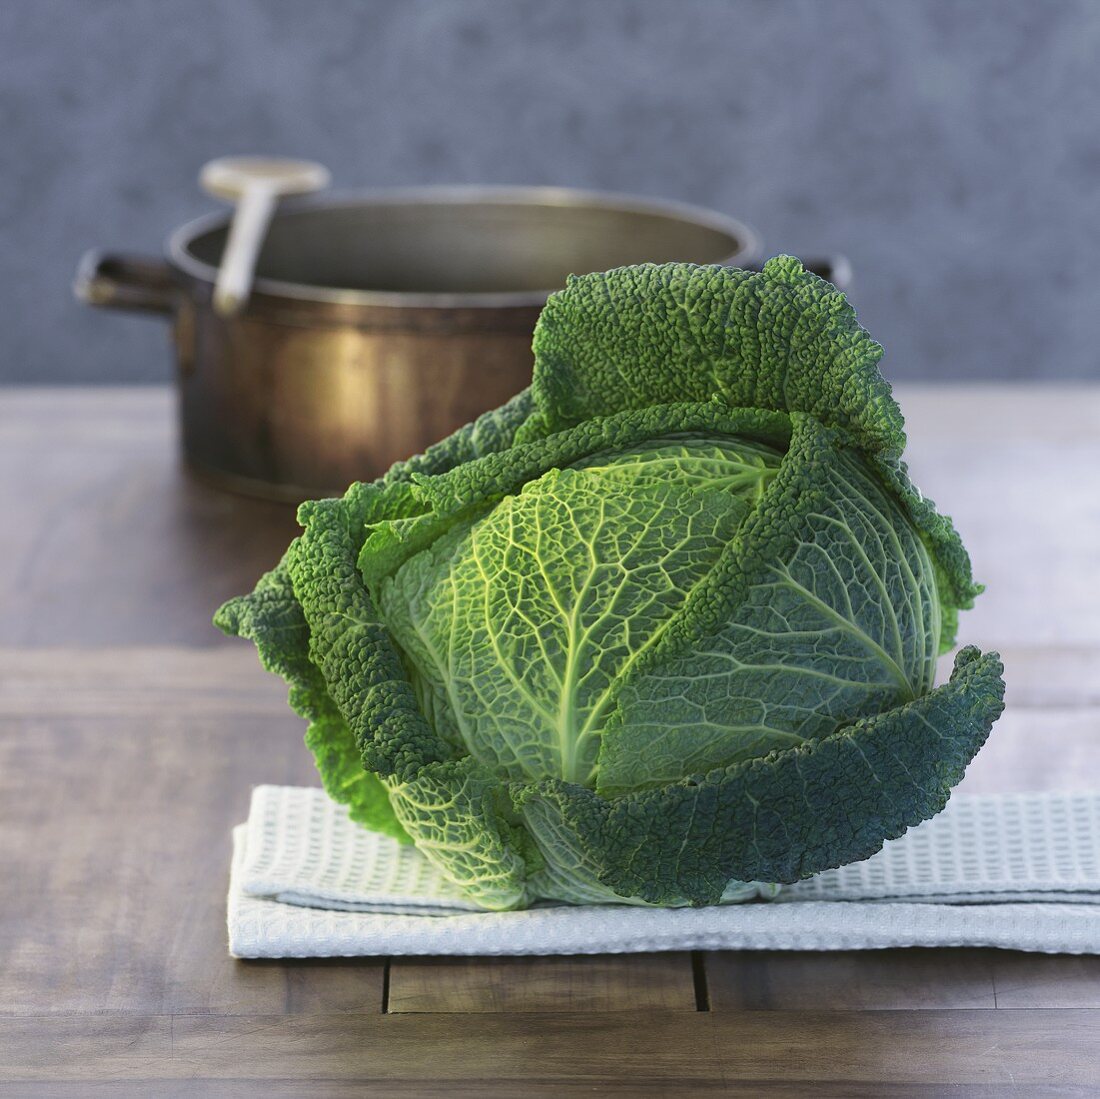 Savoy cabbage, cooking pot in background